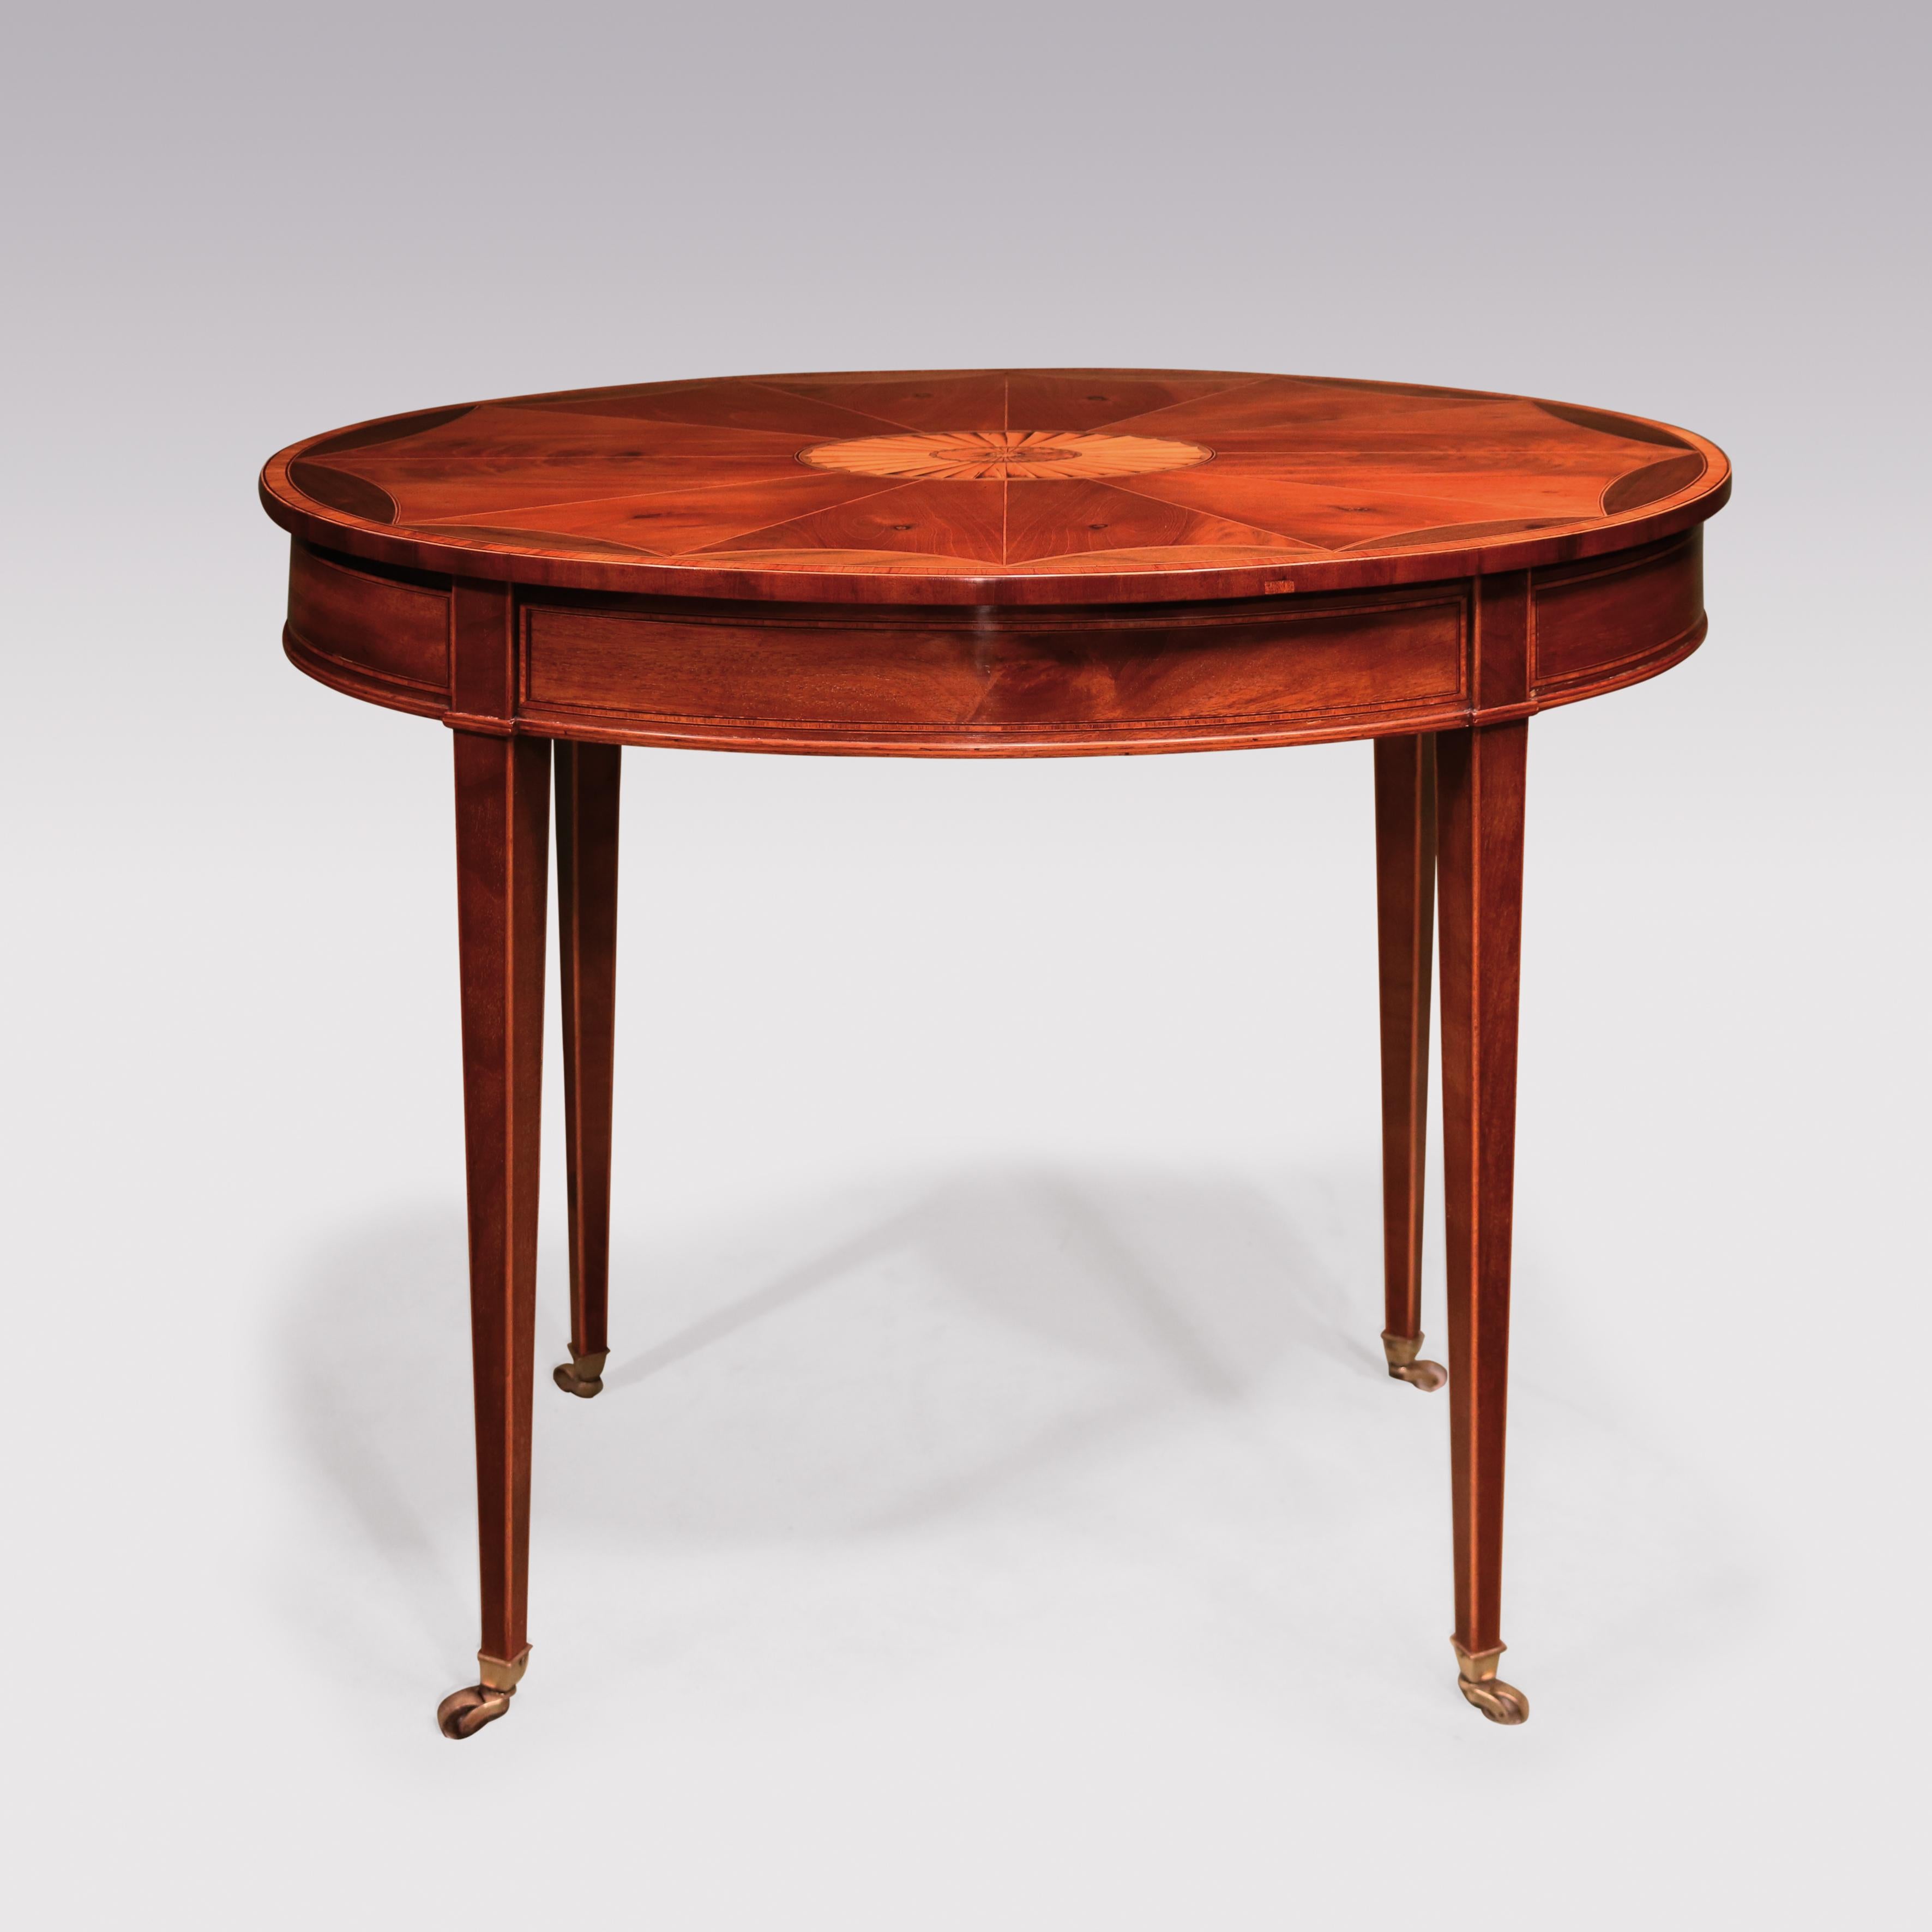 A late 18th century Sheraton period mahogany occasional table, boxwood and ebony strung throughout, having oval segmented top with central fan inlay, supported on square tapering legs ending on brass box castors.